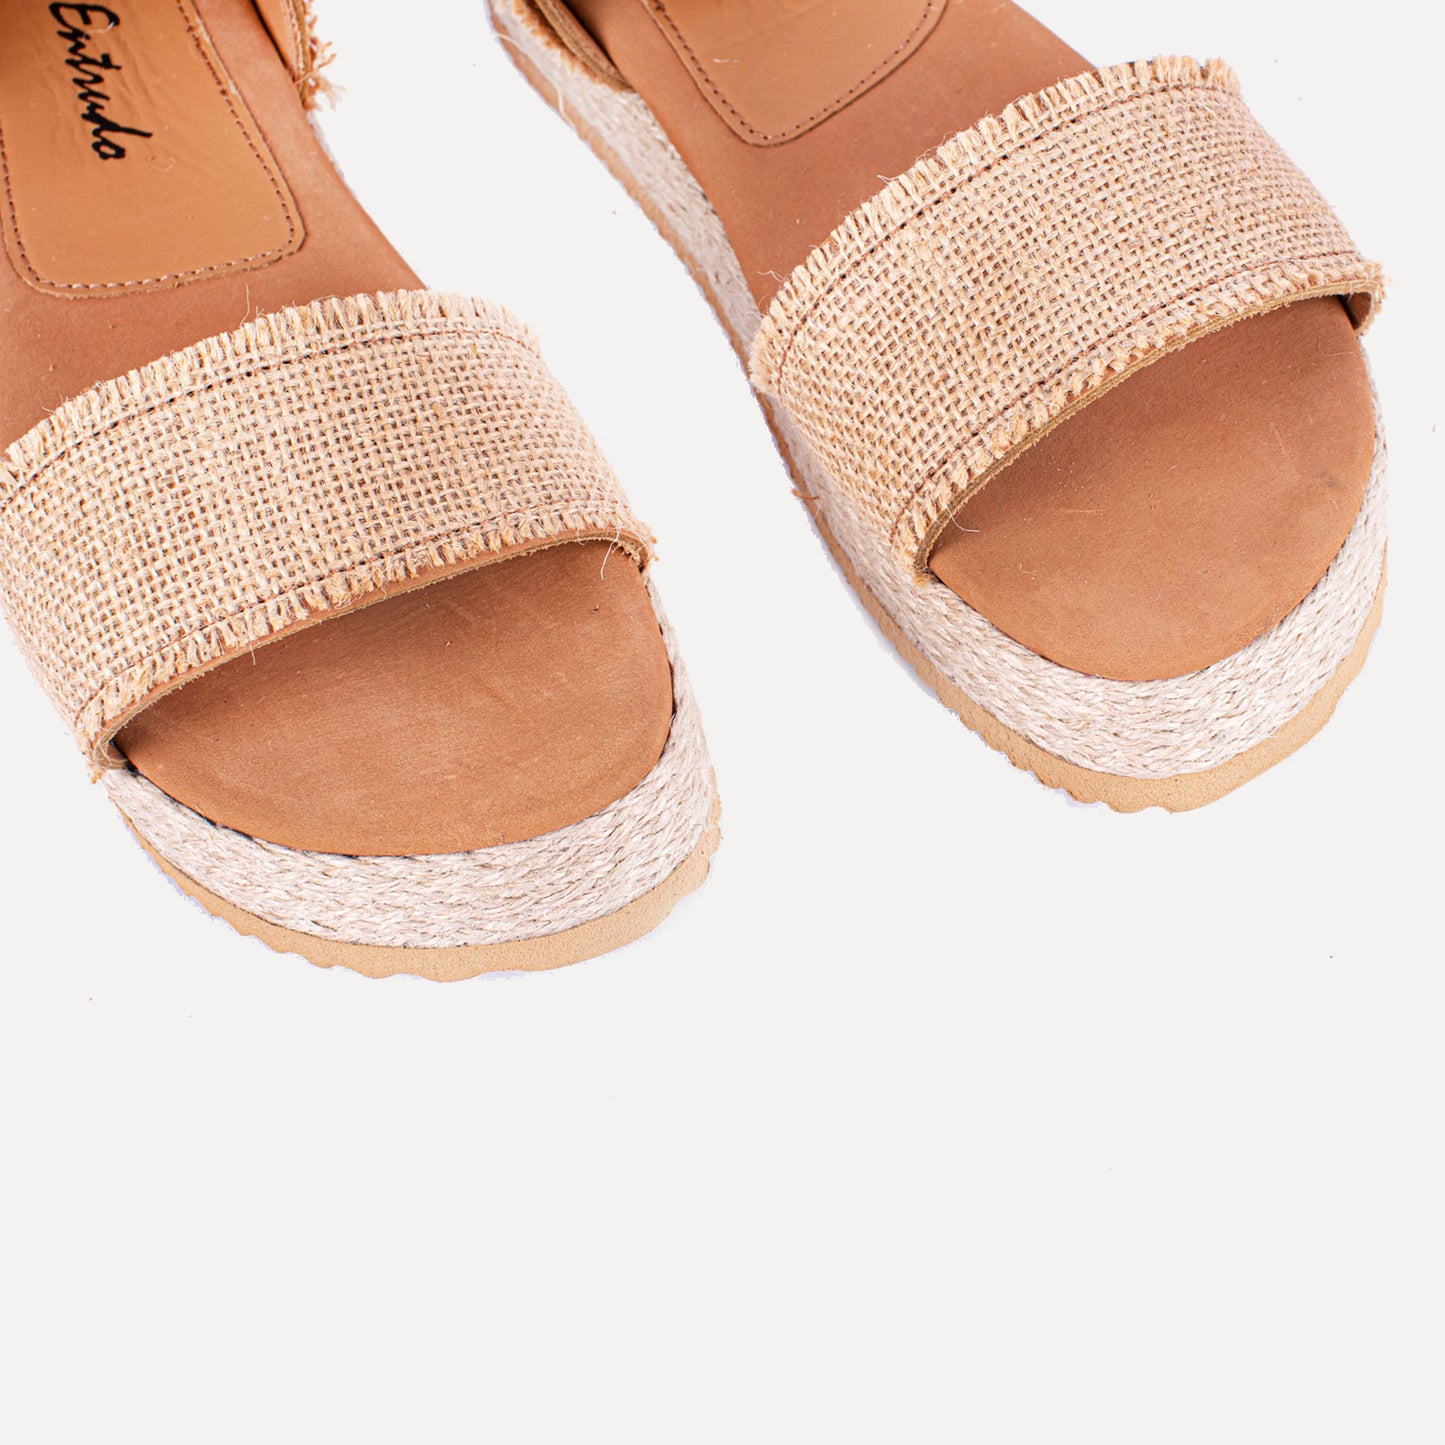 Chama - sandals with jute